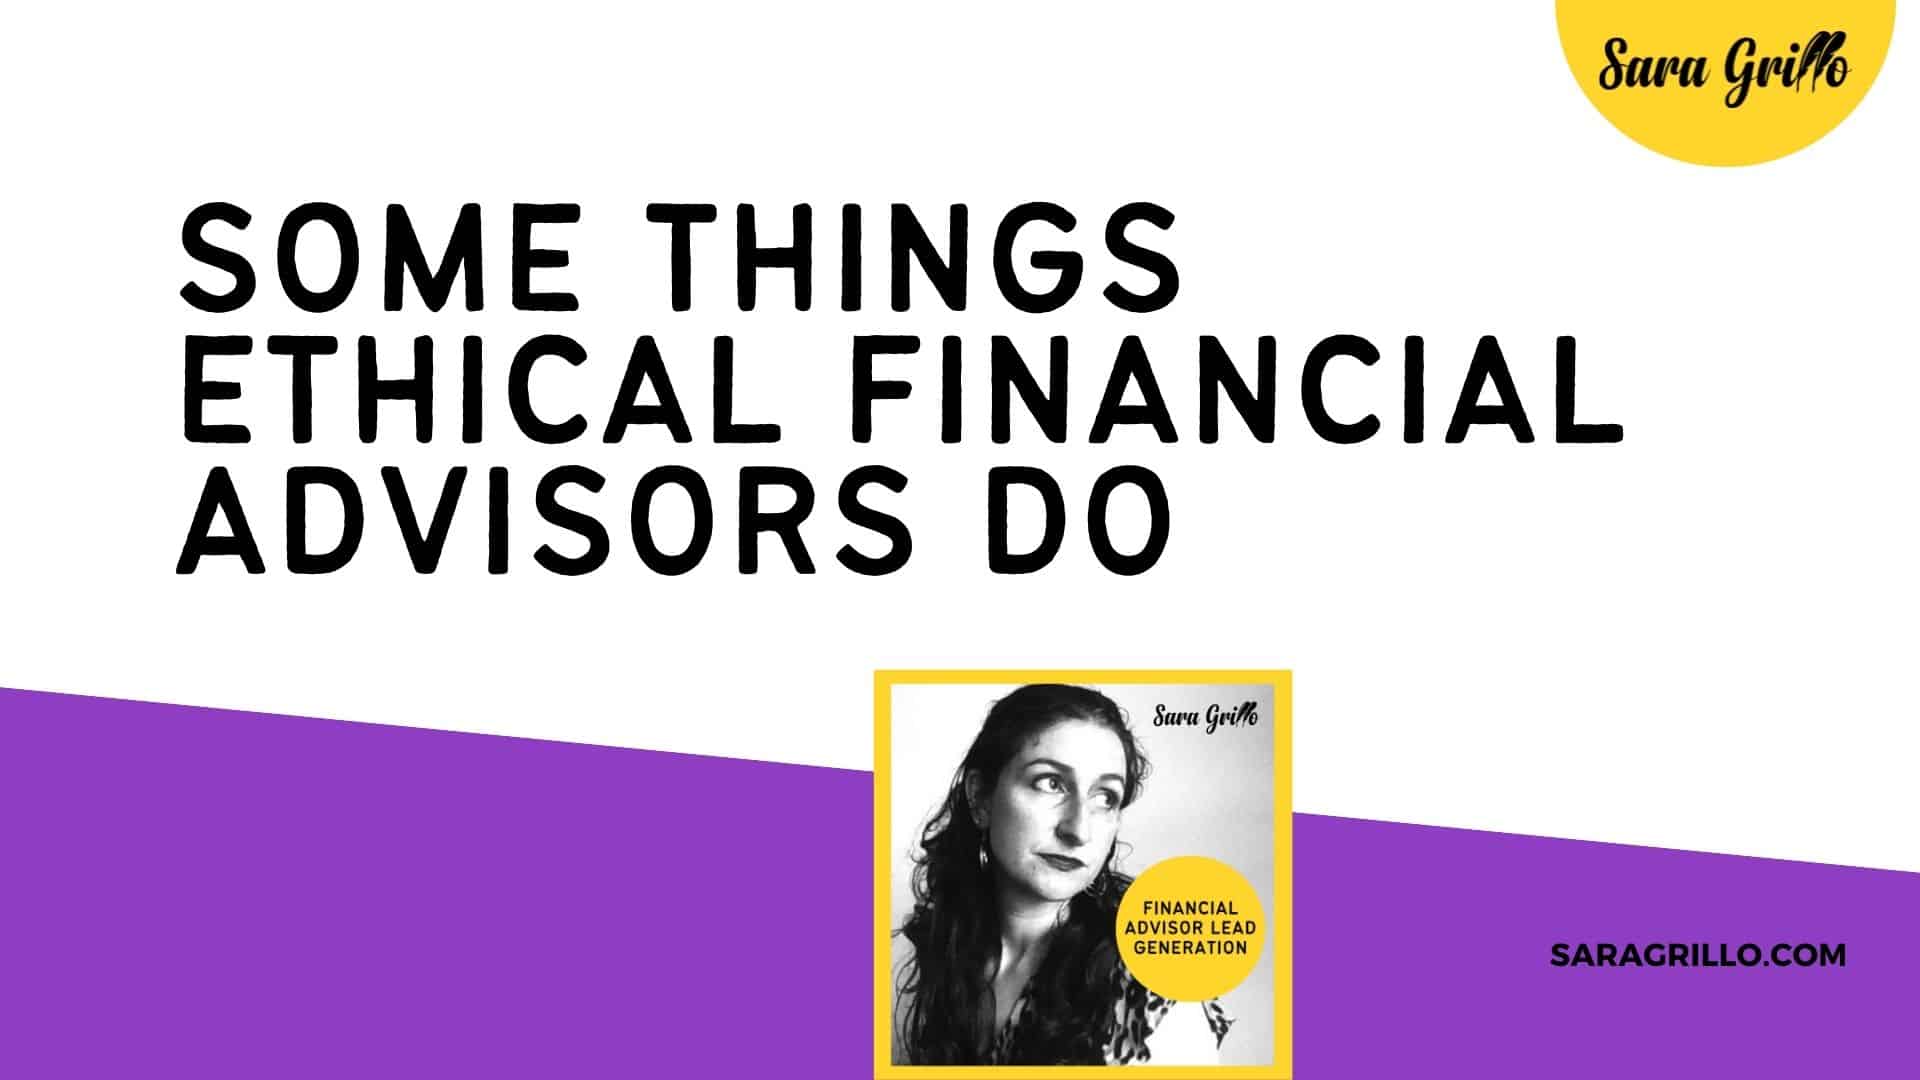 Here are some things ethical financial advisors do.